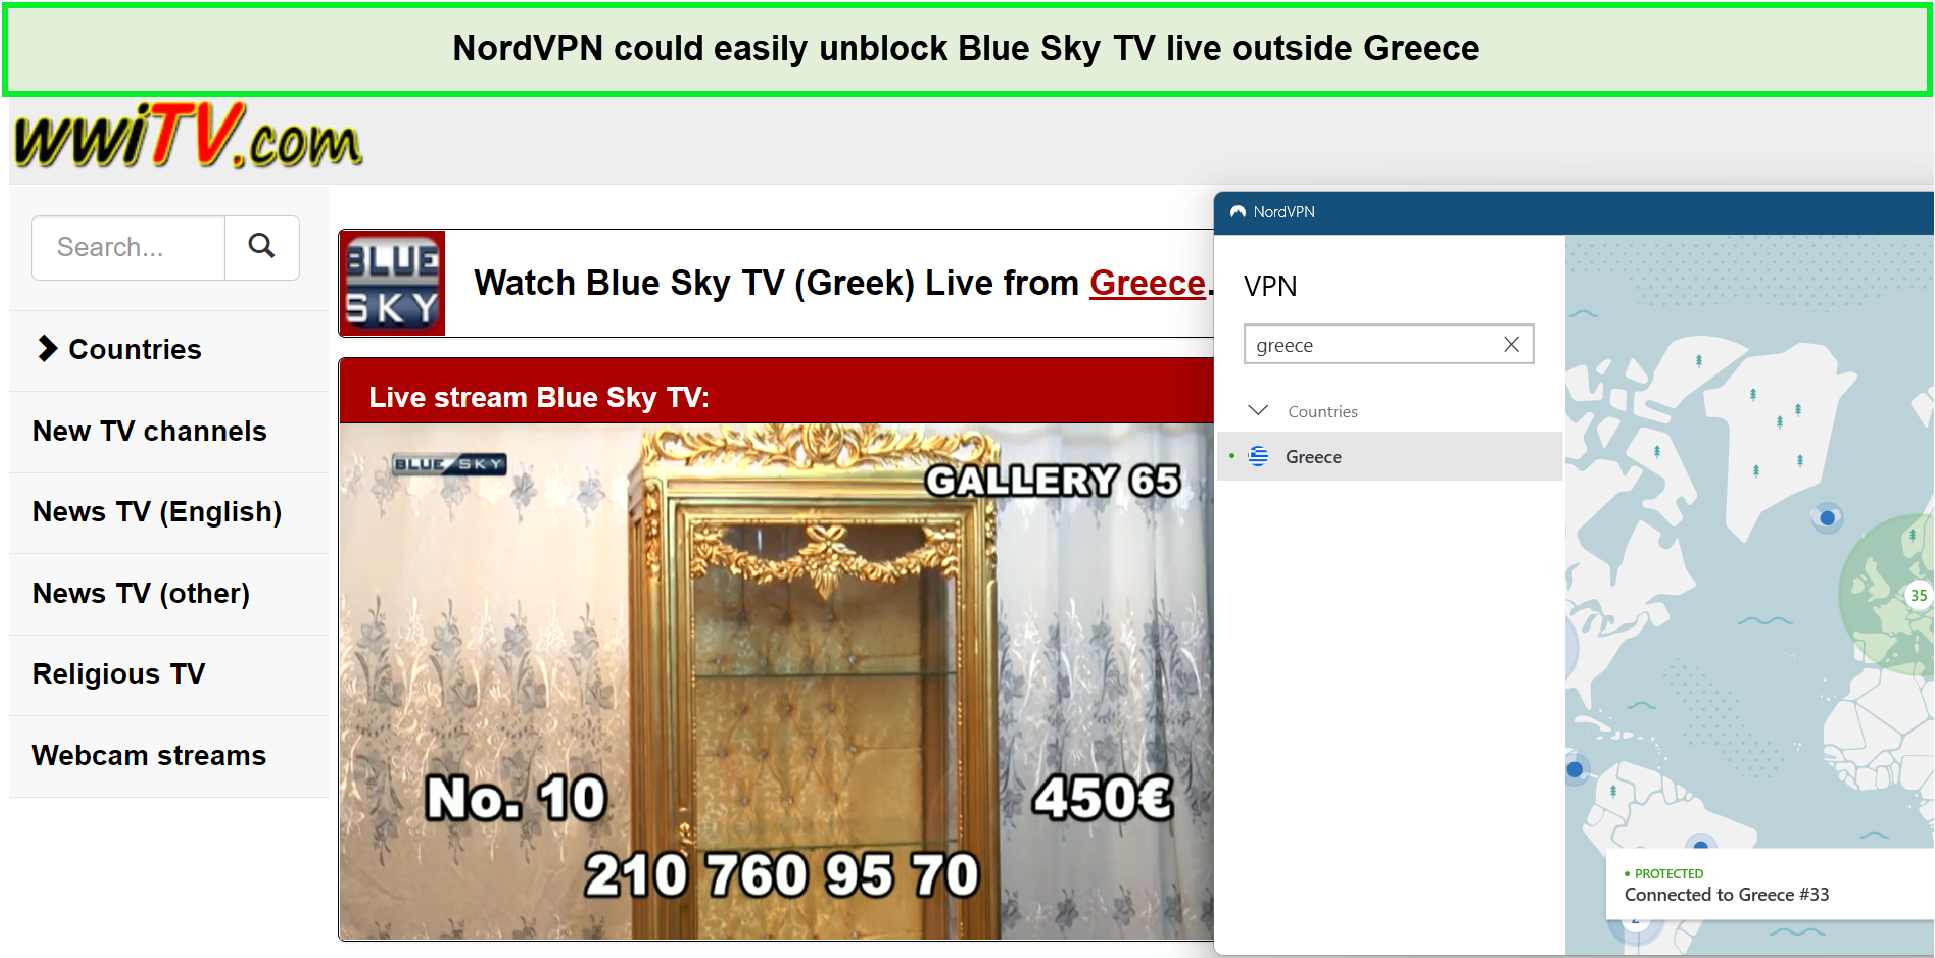 NordVPN-easily-unblock-Bly-Sky-TV-outside-Greece-For Italy Users